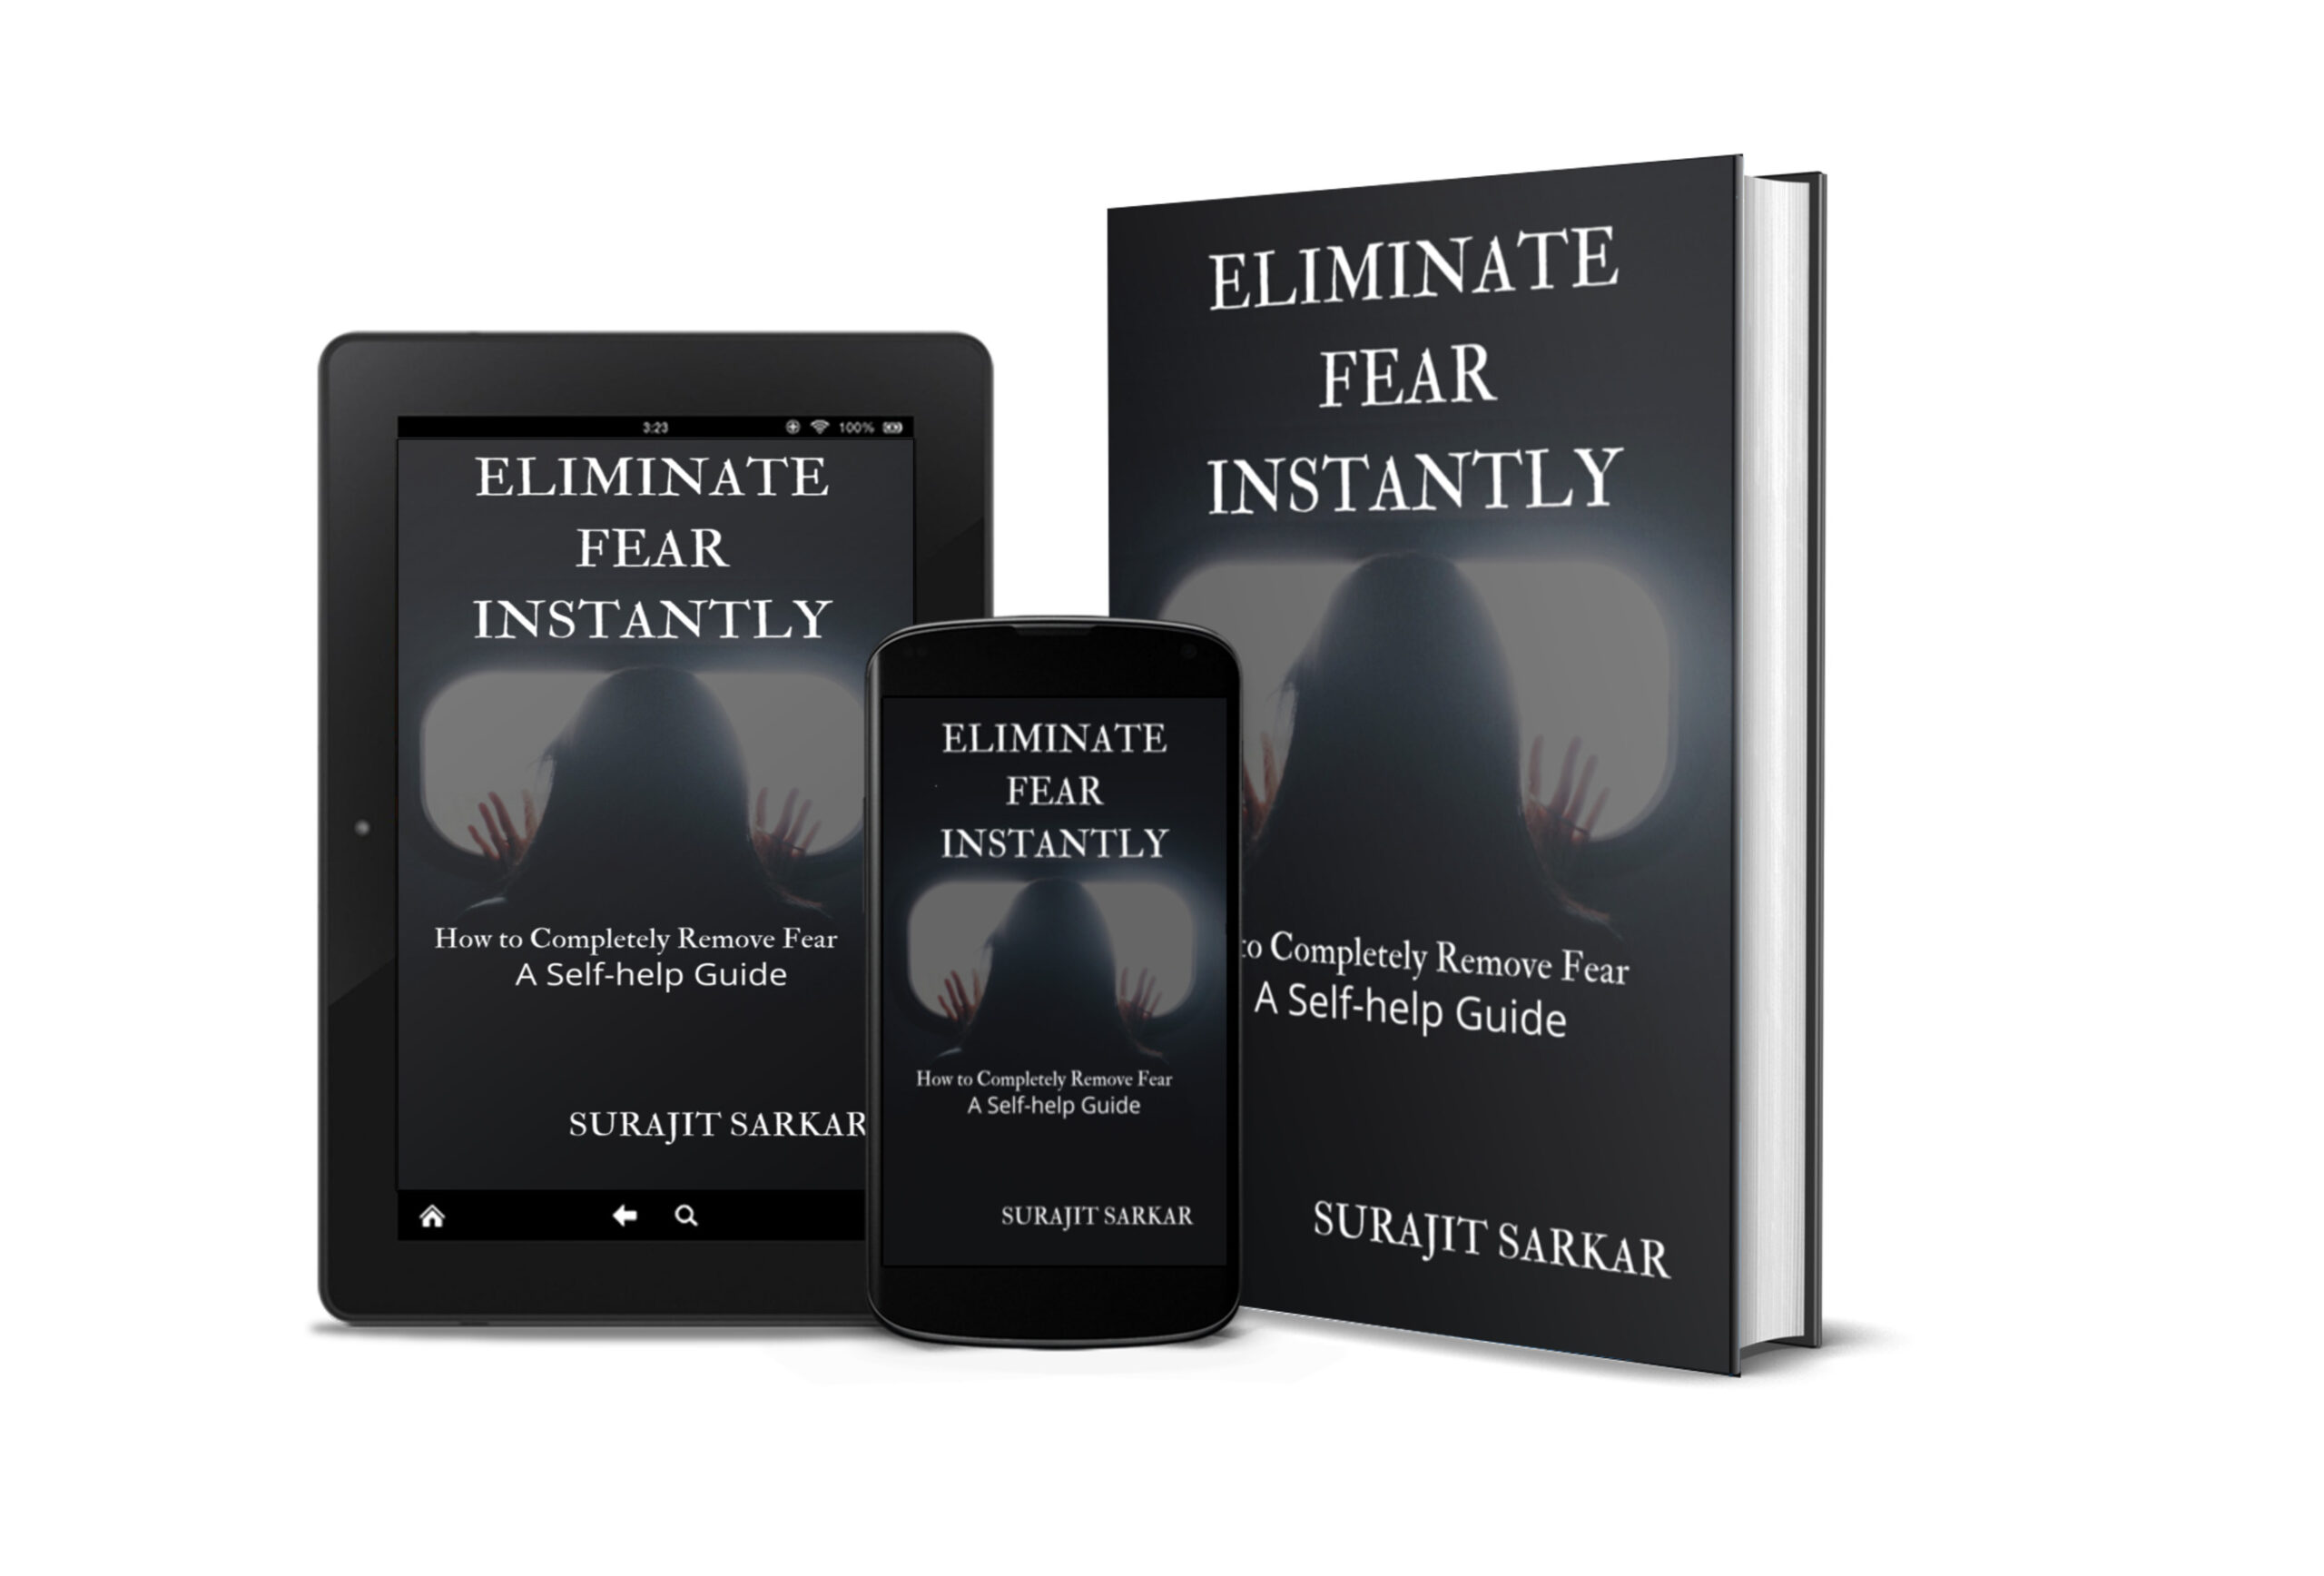 FREE: ELIMINATE FEAR INSTANTLY: How to Completely Remove Fear: A Self-help Guide by Surajit Sarkar